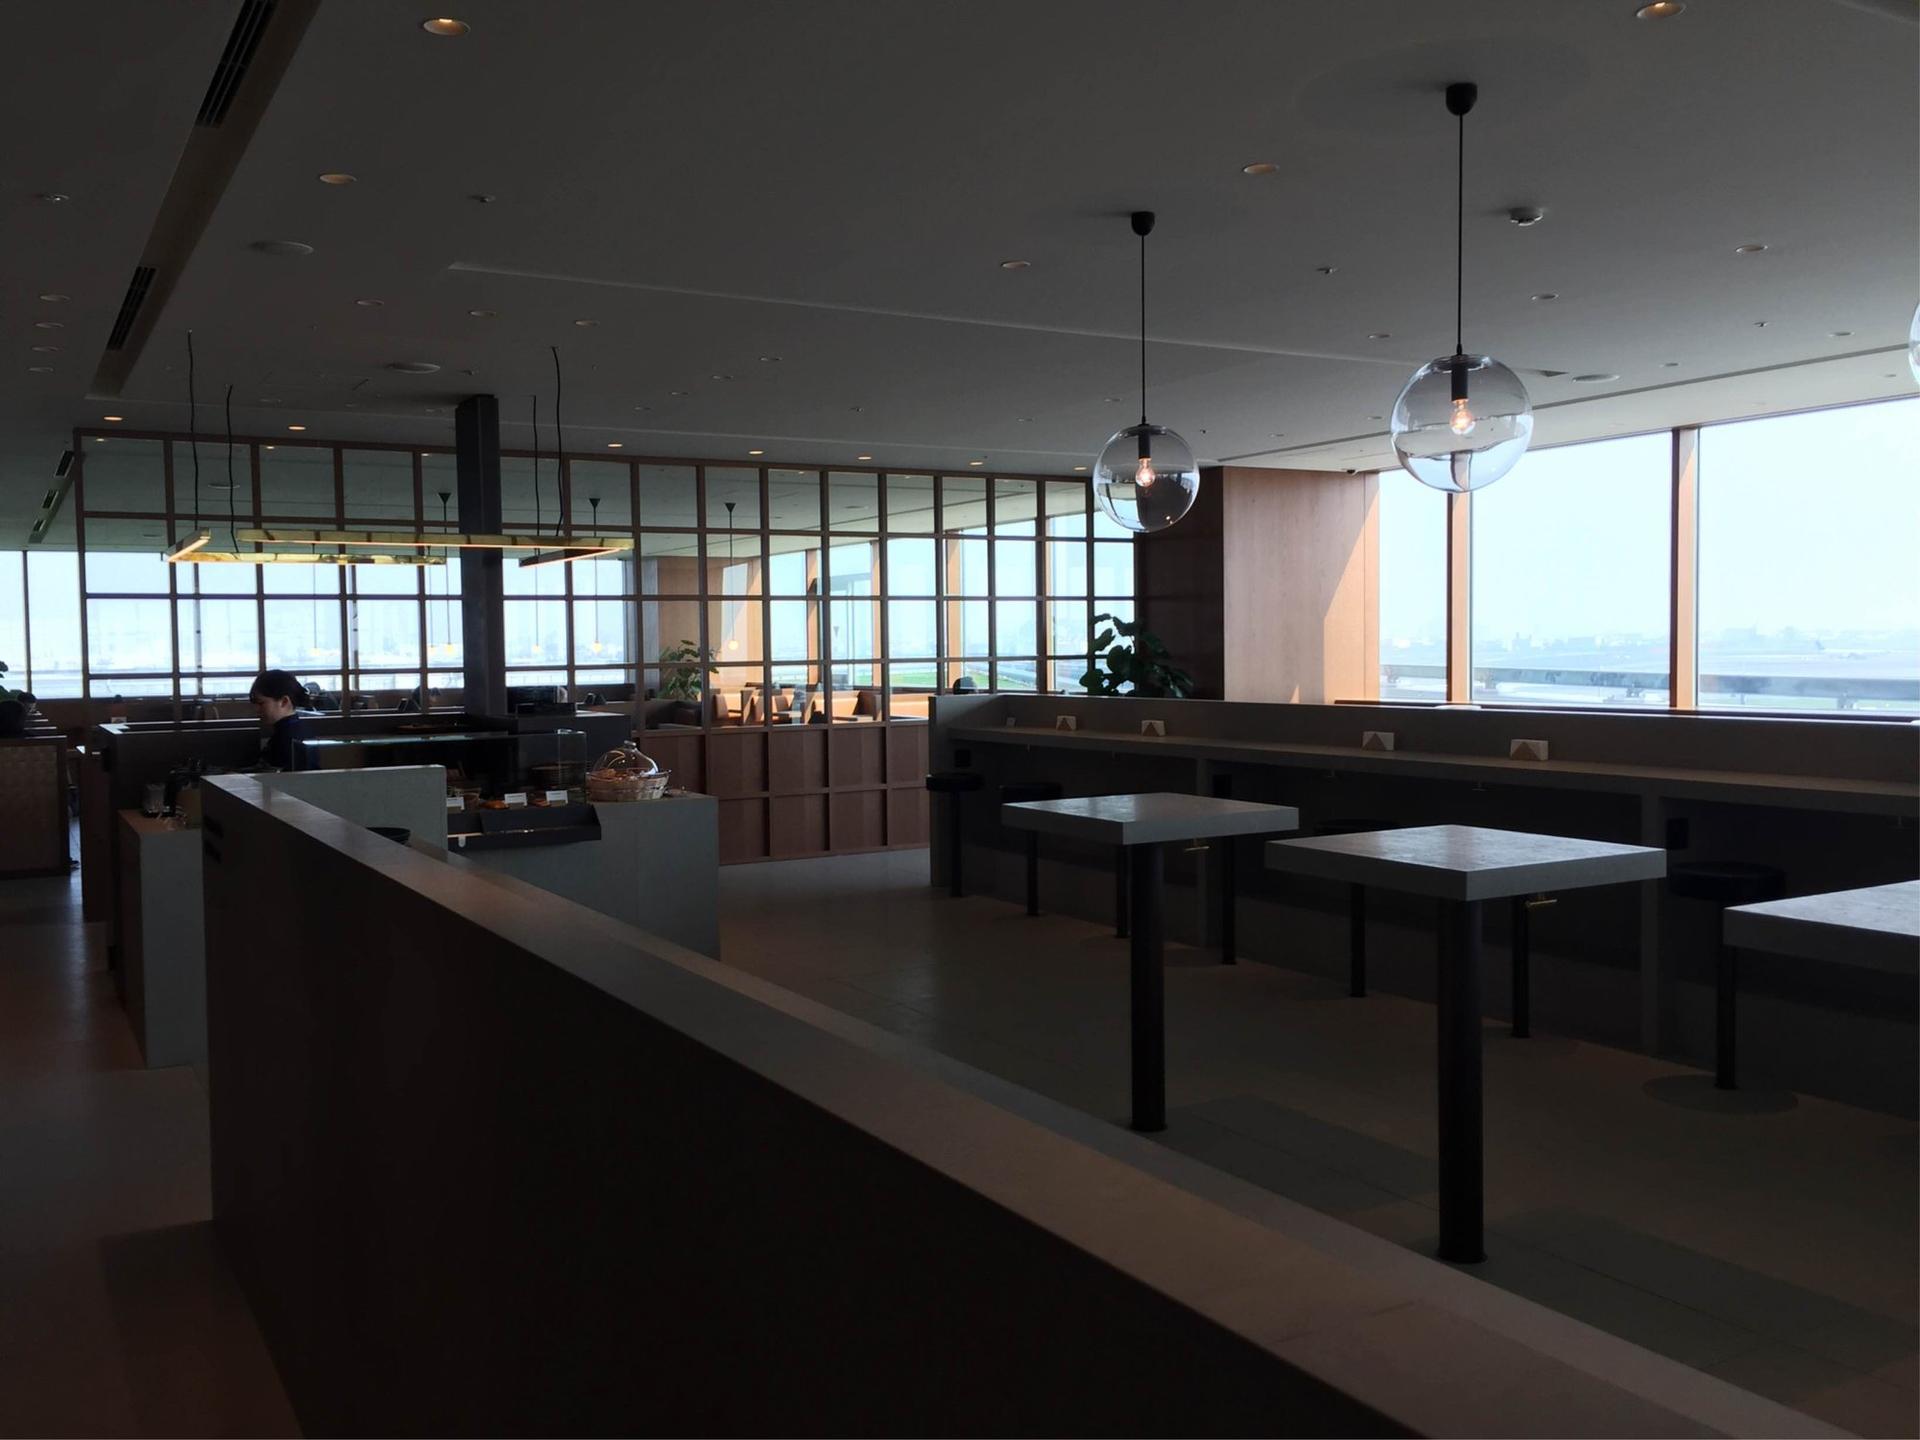 Cathay Pacific Lounge image 14 of 49